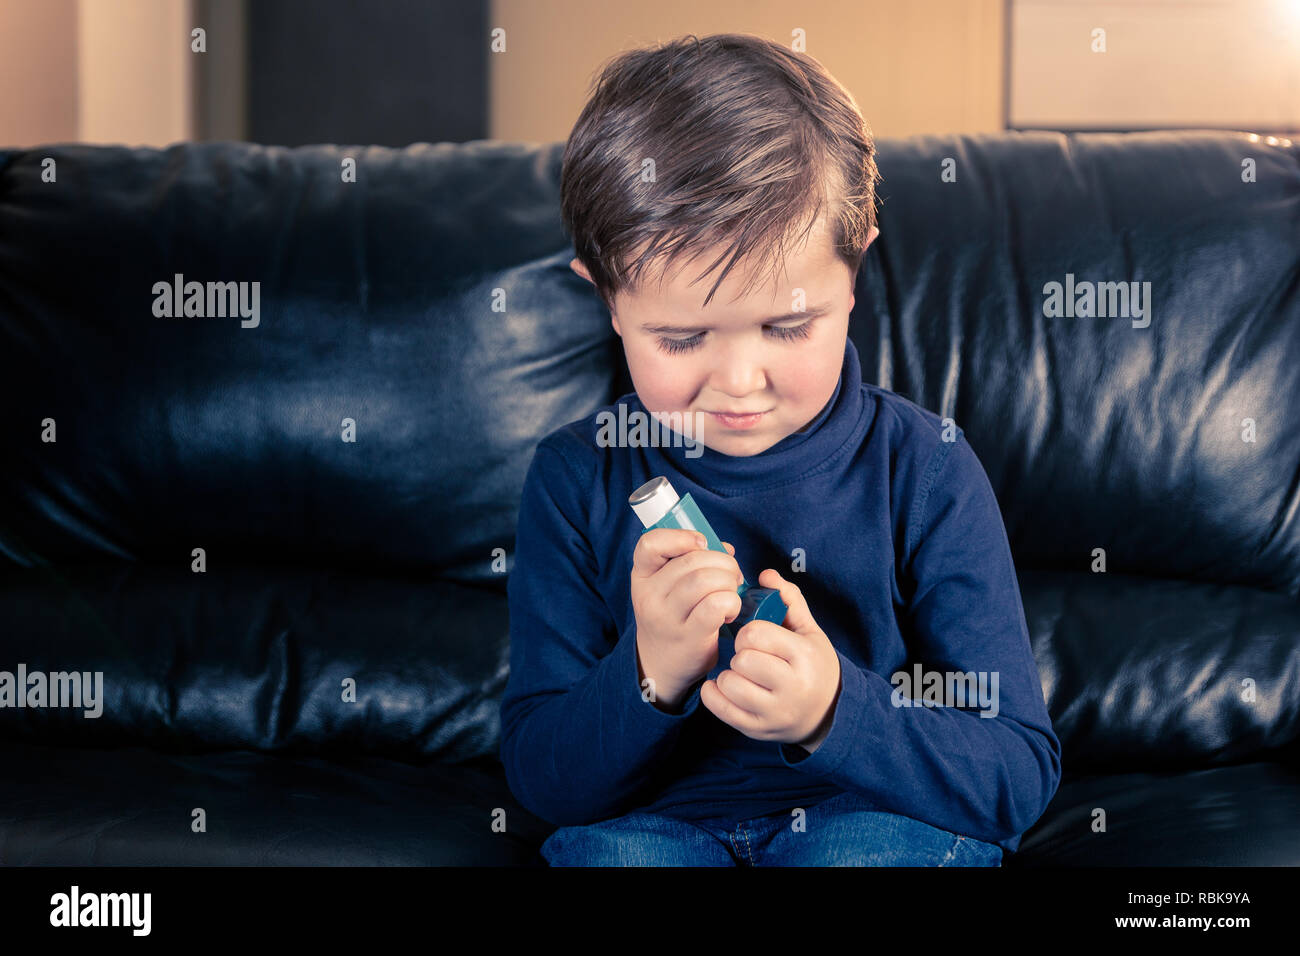 Cute 5 year old boy taking off cap of asthma inhaler, sitting in black leather sofa Stock Photo